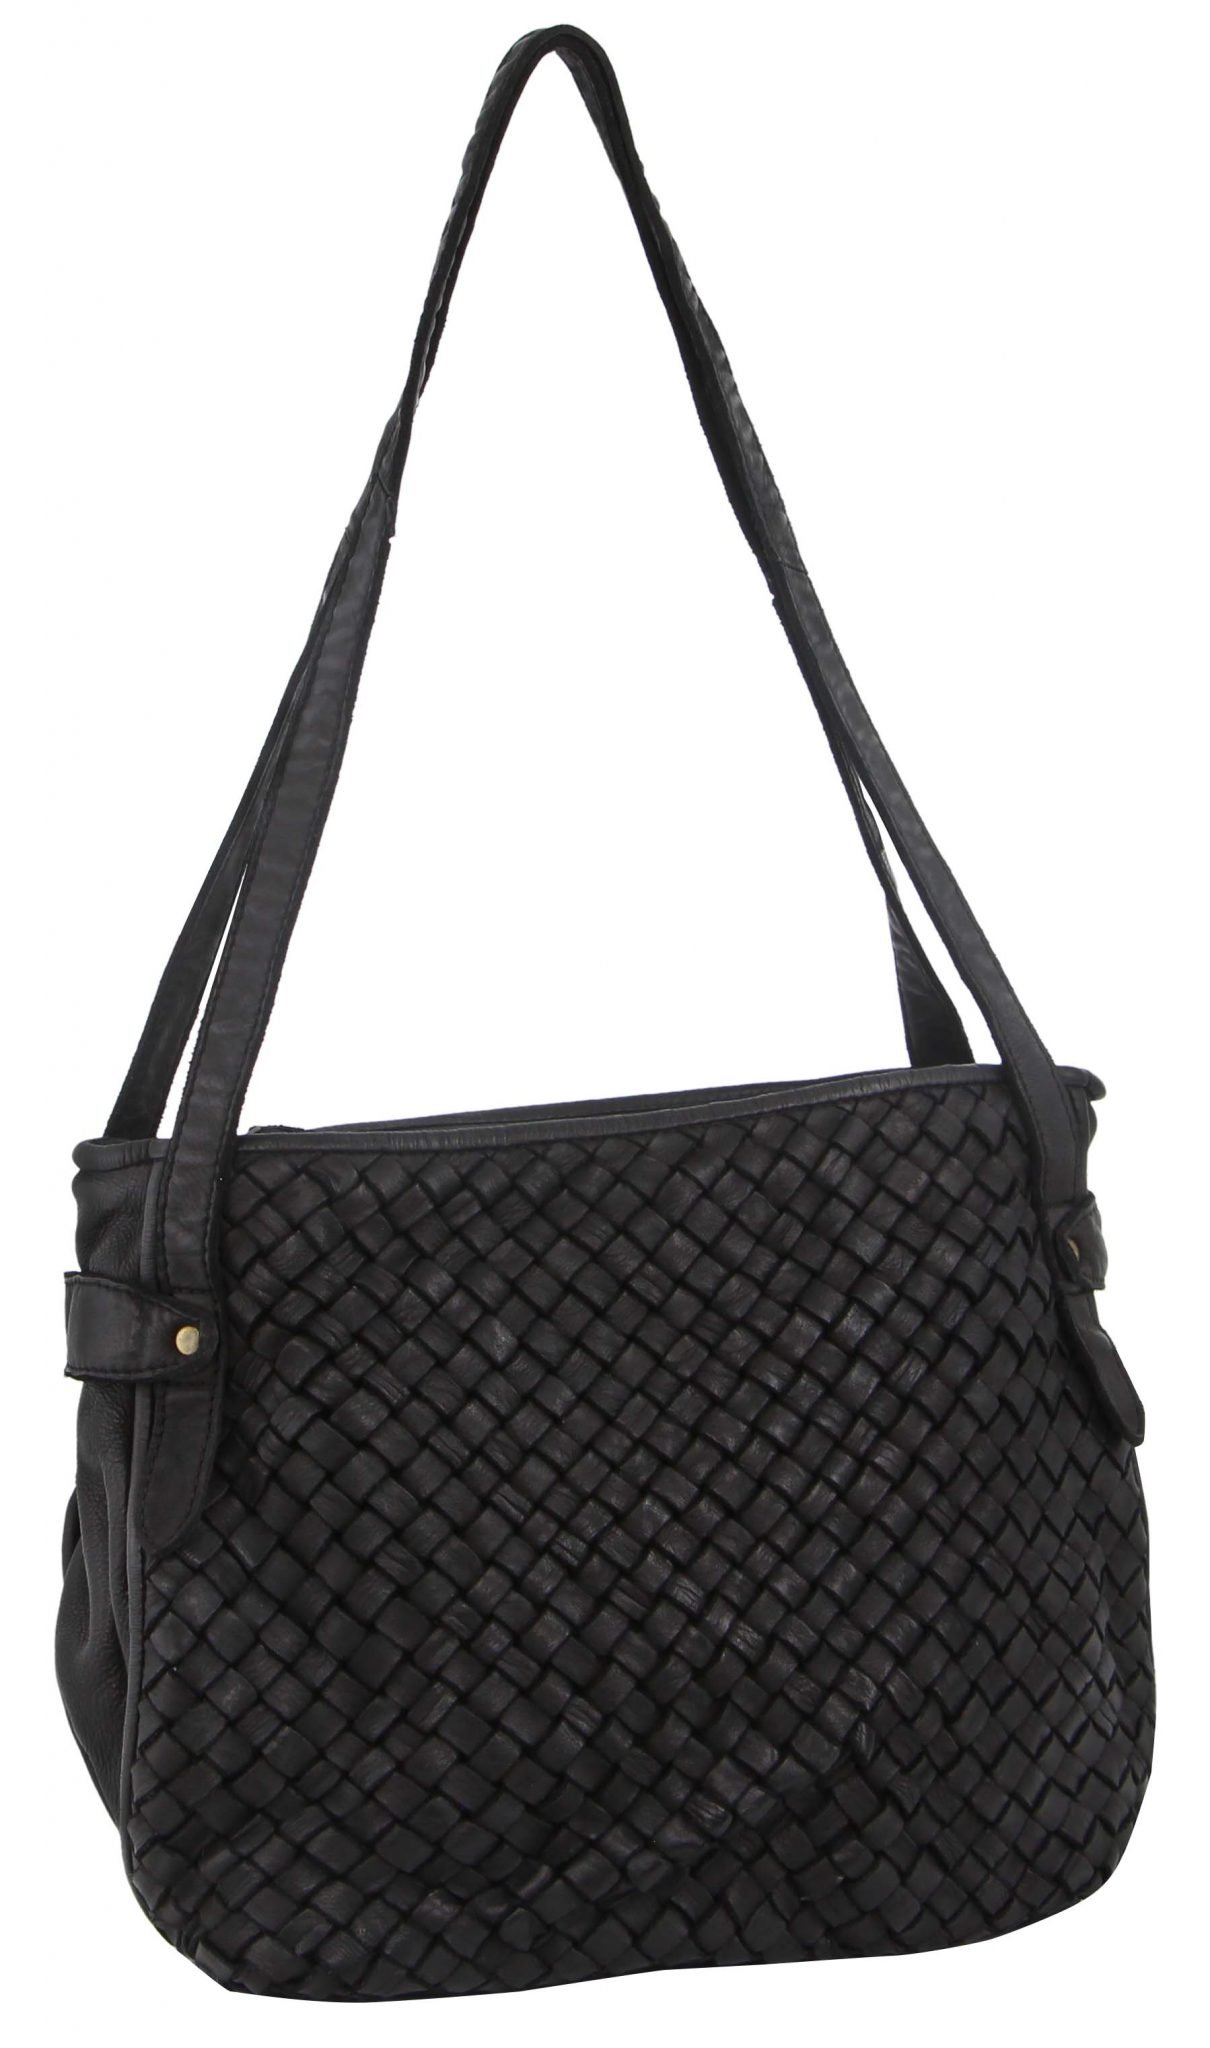 Pierre Cardin Woven Leather Shoulder Bag | The Leather Crew